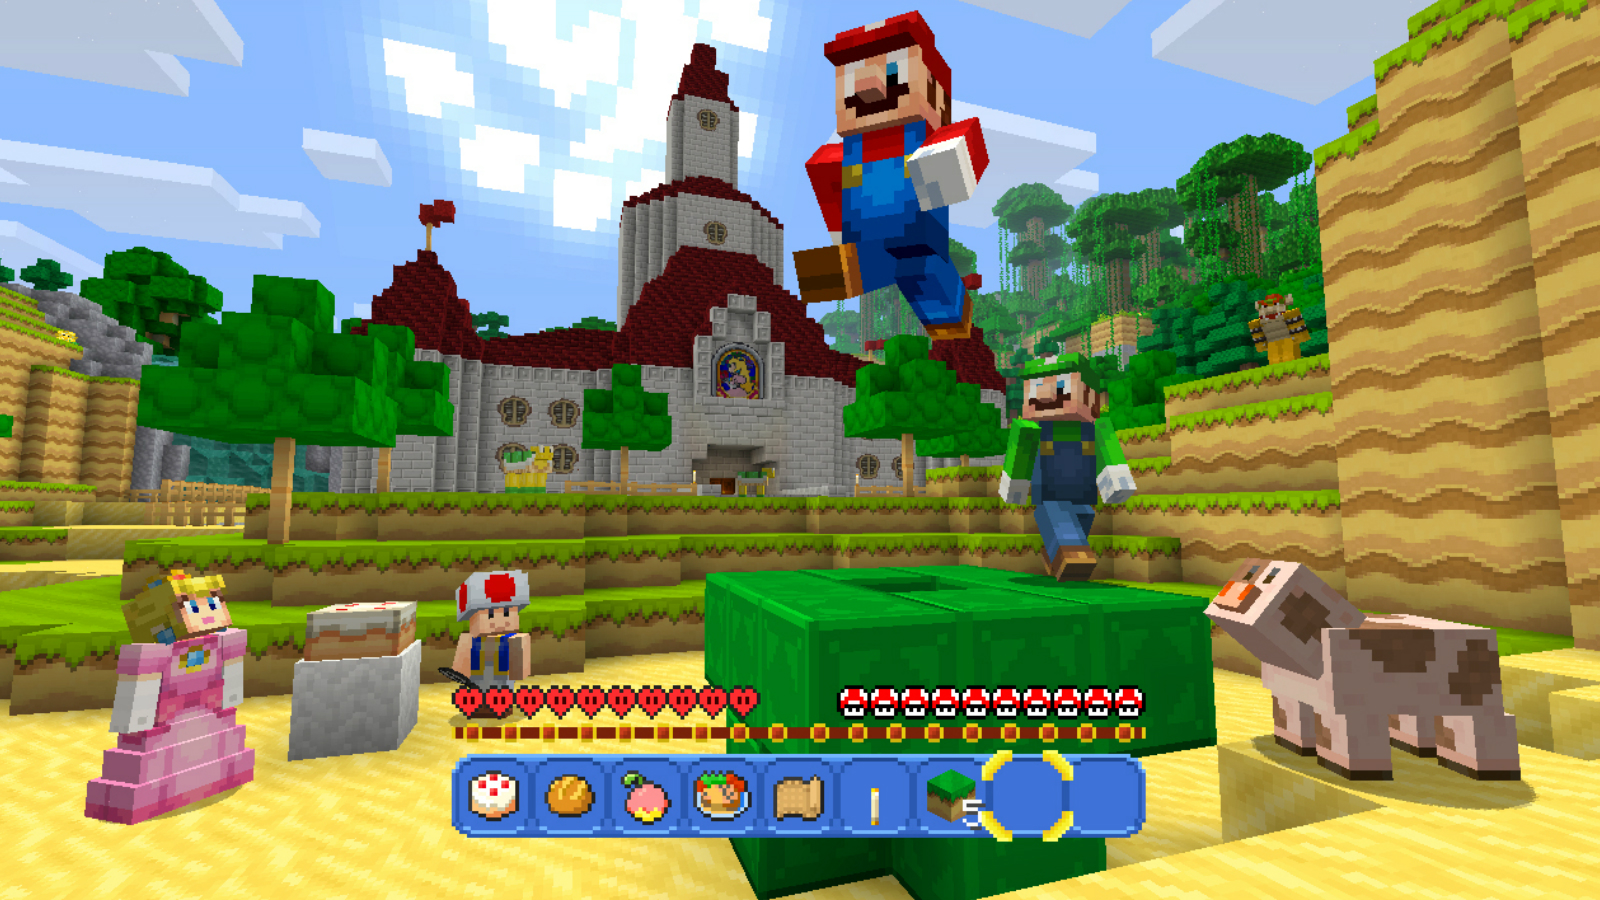 Mario and the gang brought to life in Minecraft